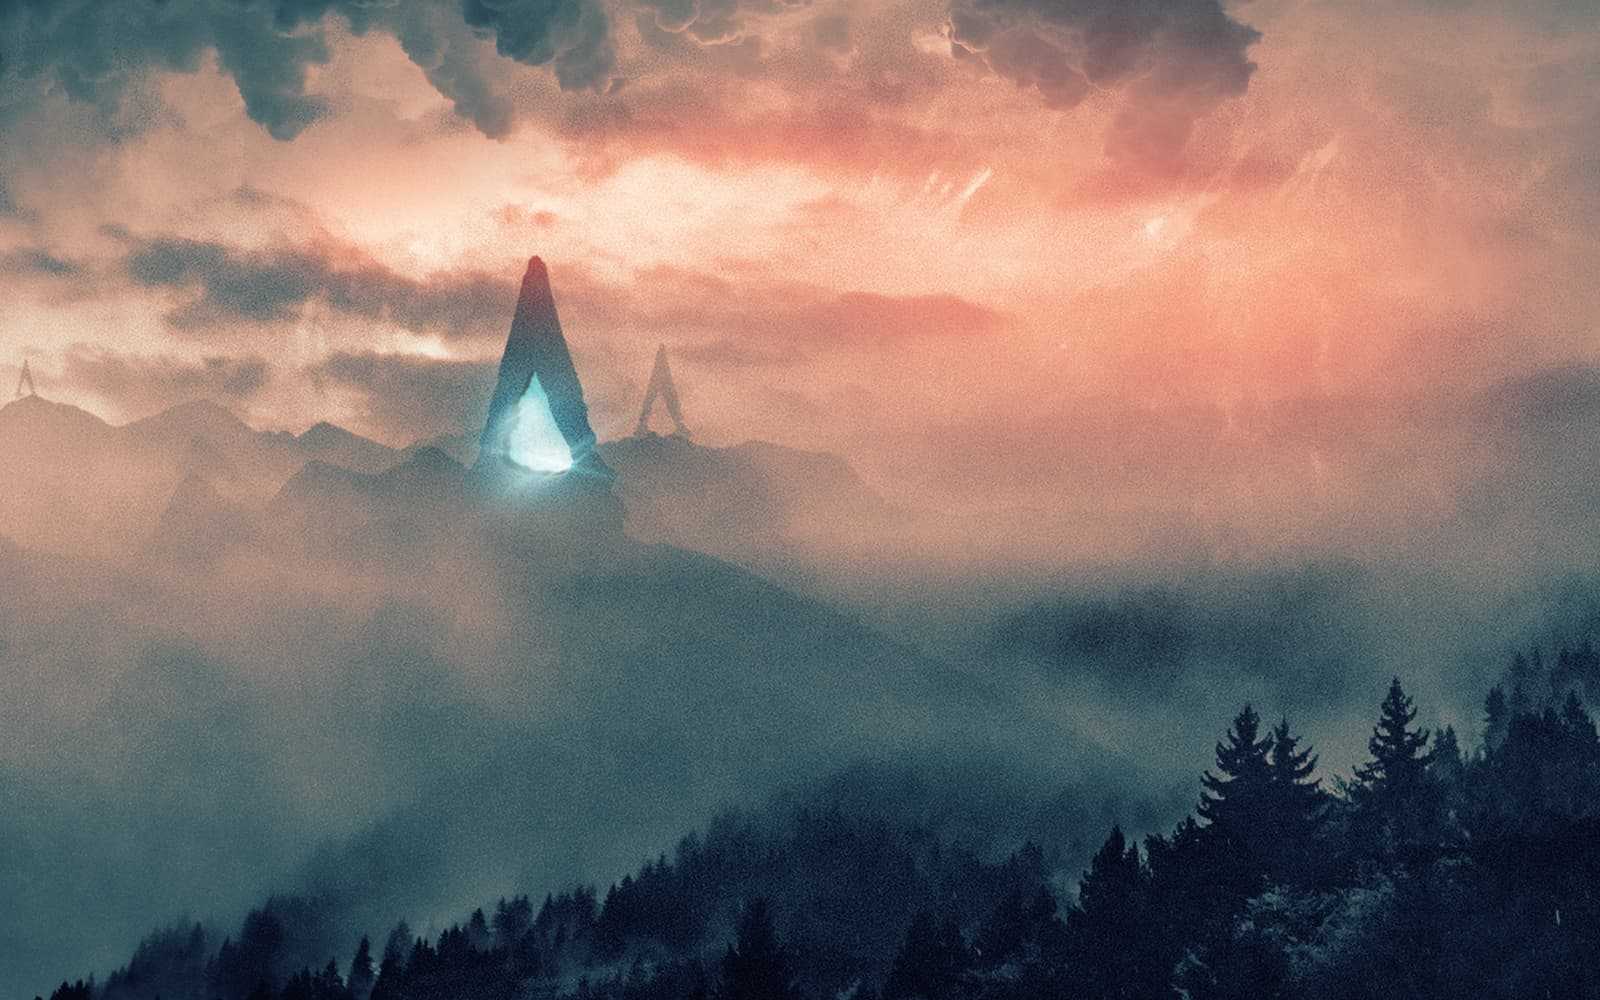 A strange alien artifact glows with bluish light against a sky filled with red clouds. A dark forest looms in the foreground.